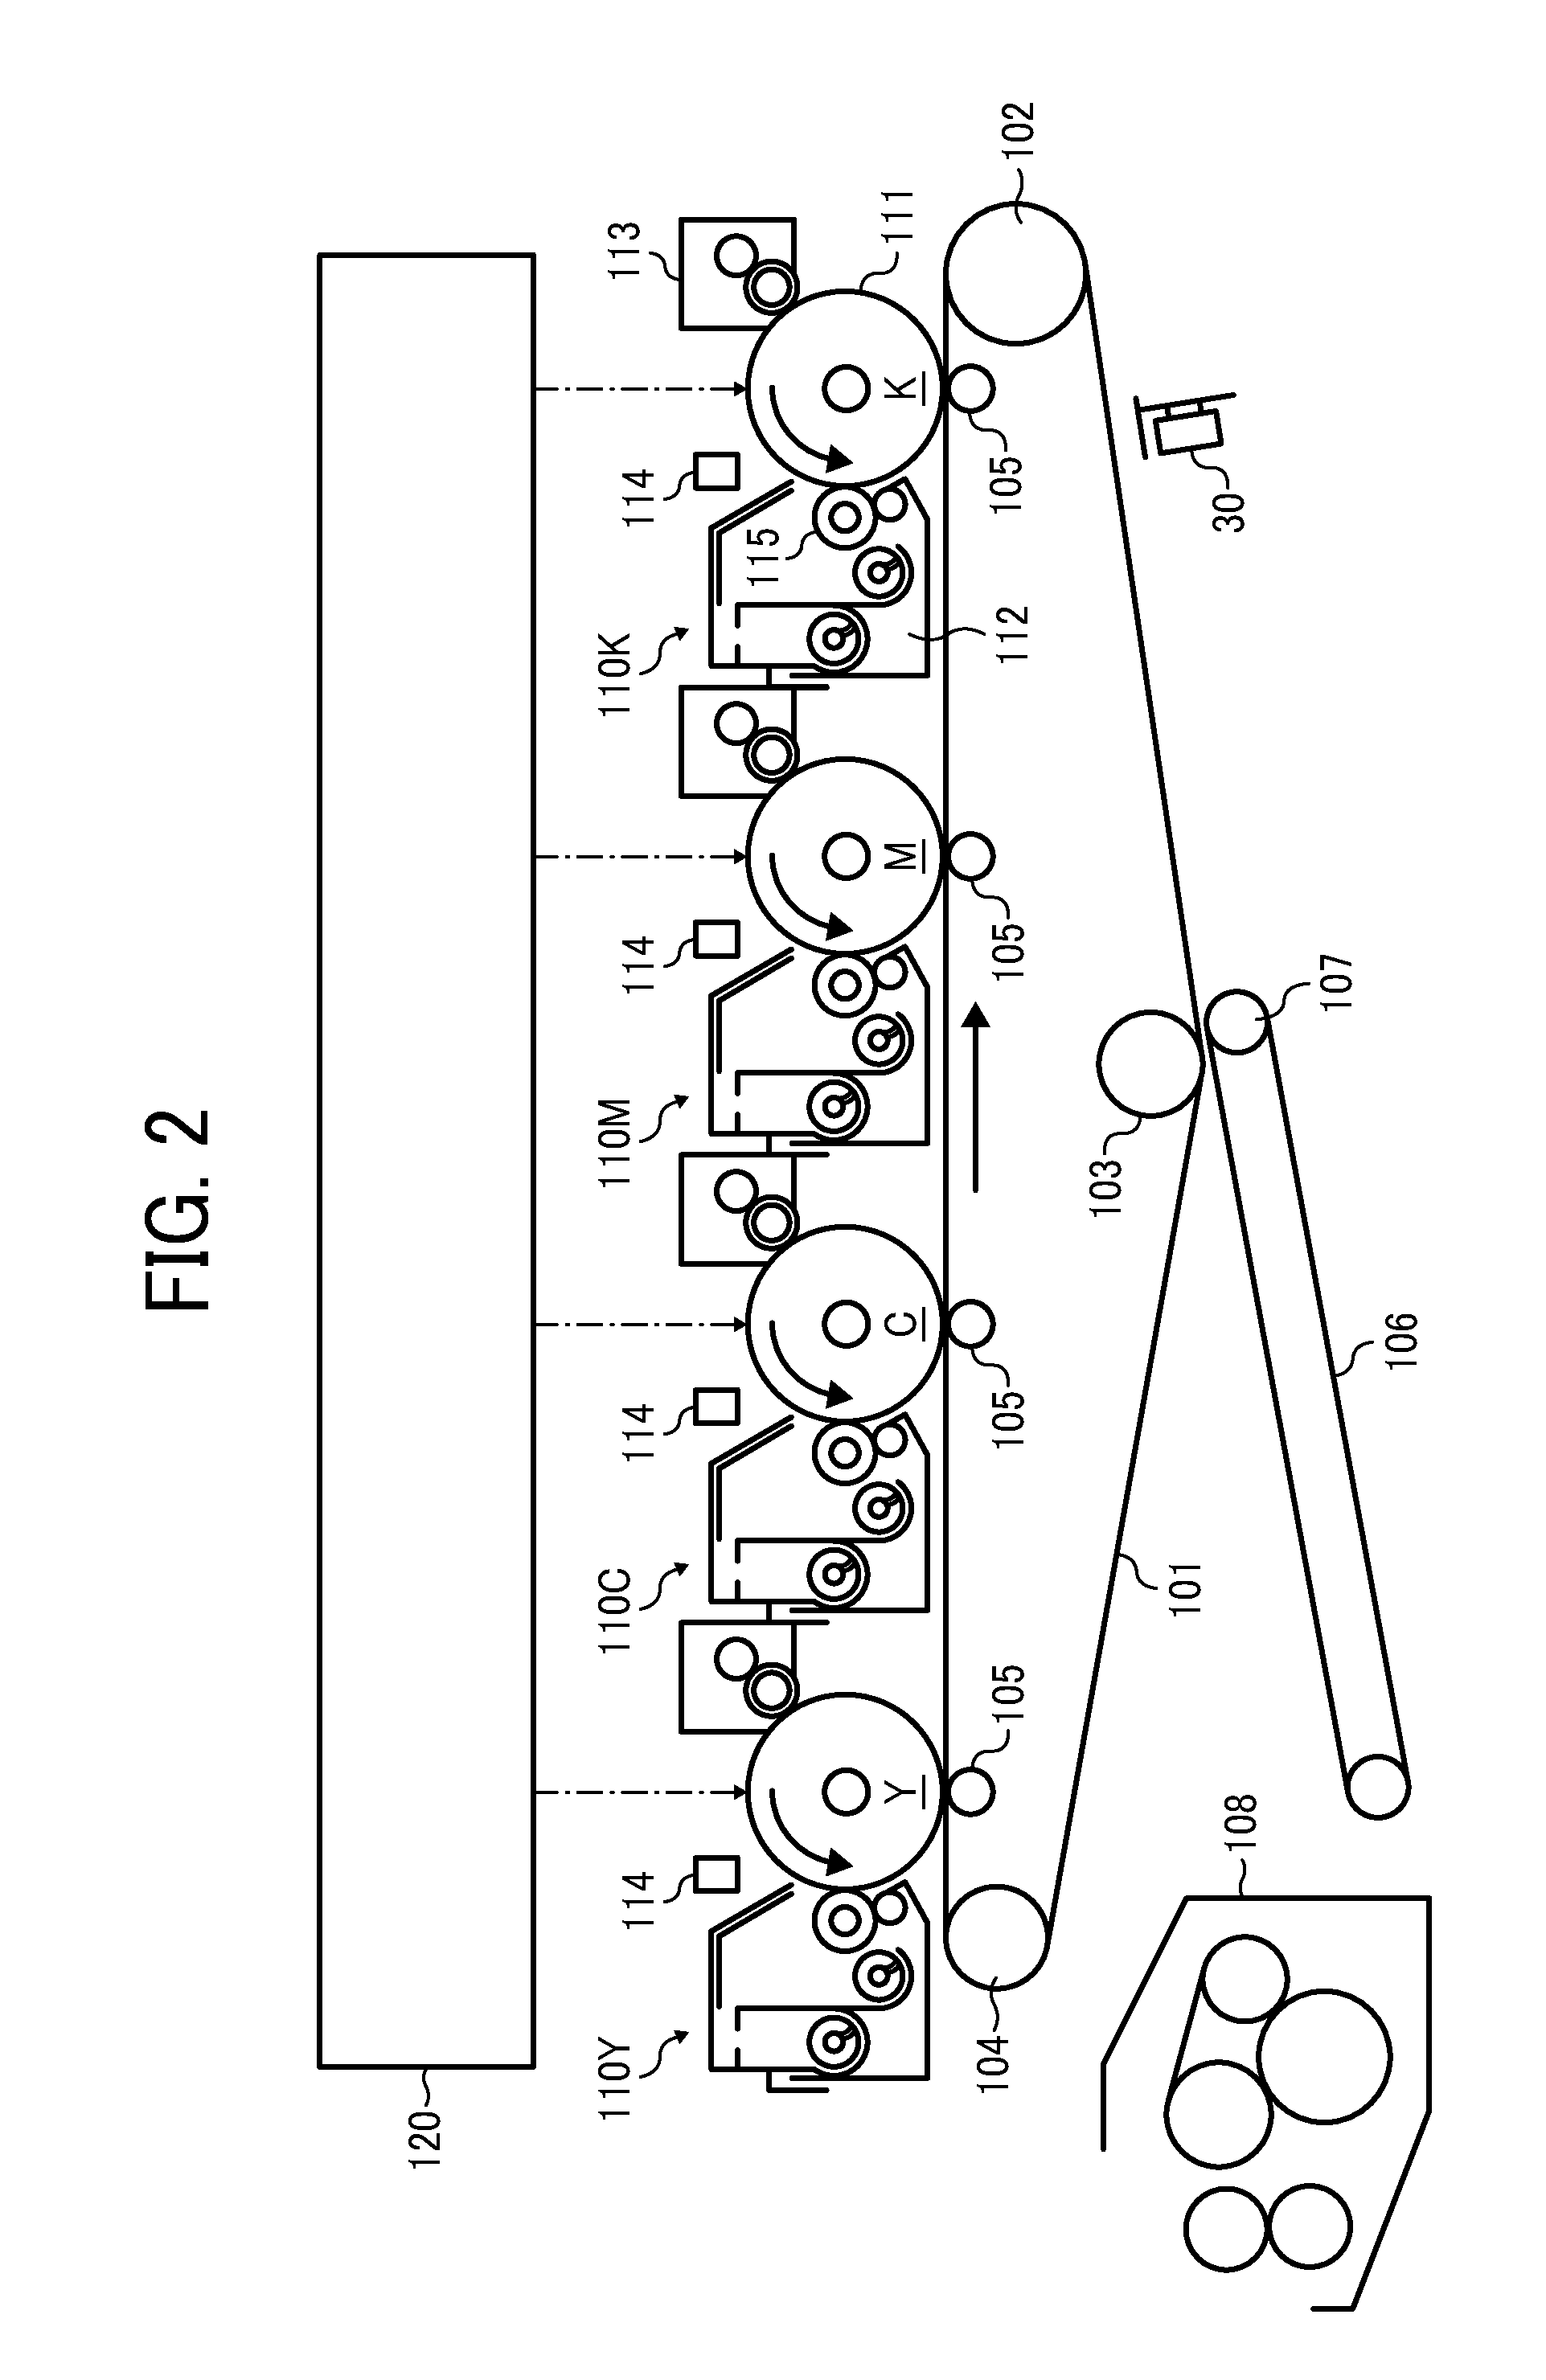 Image forming apparatus capable of optimally performing density fluctuation correction